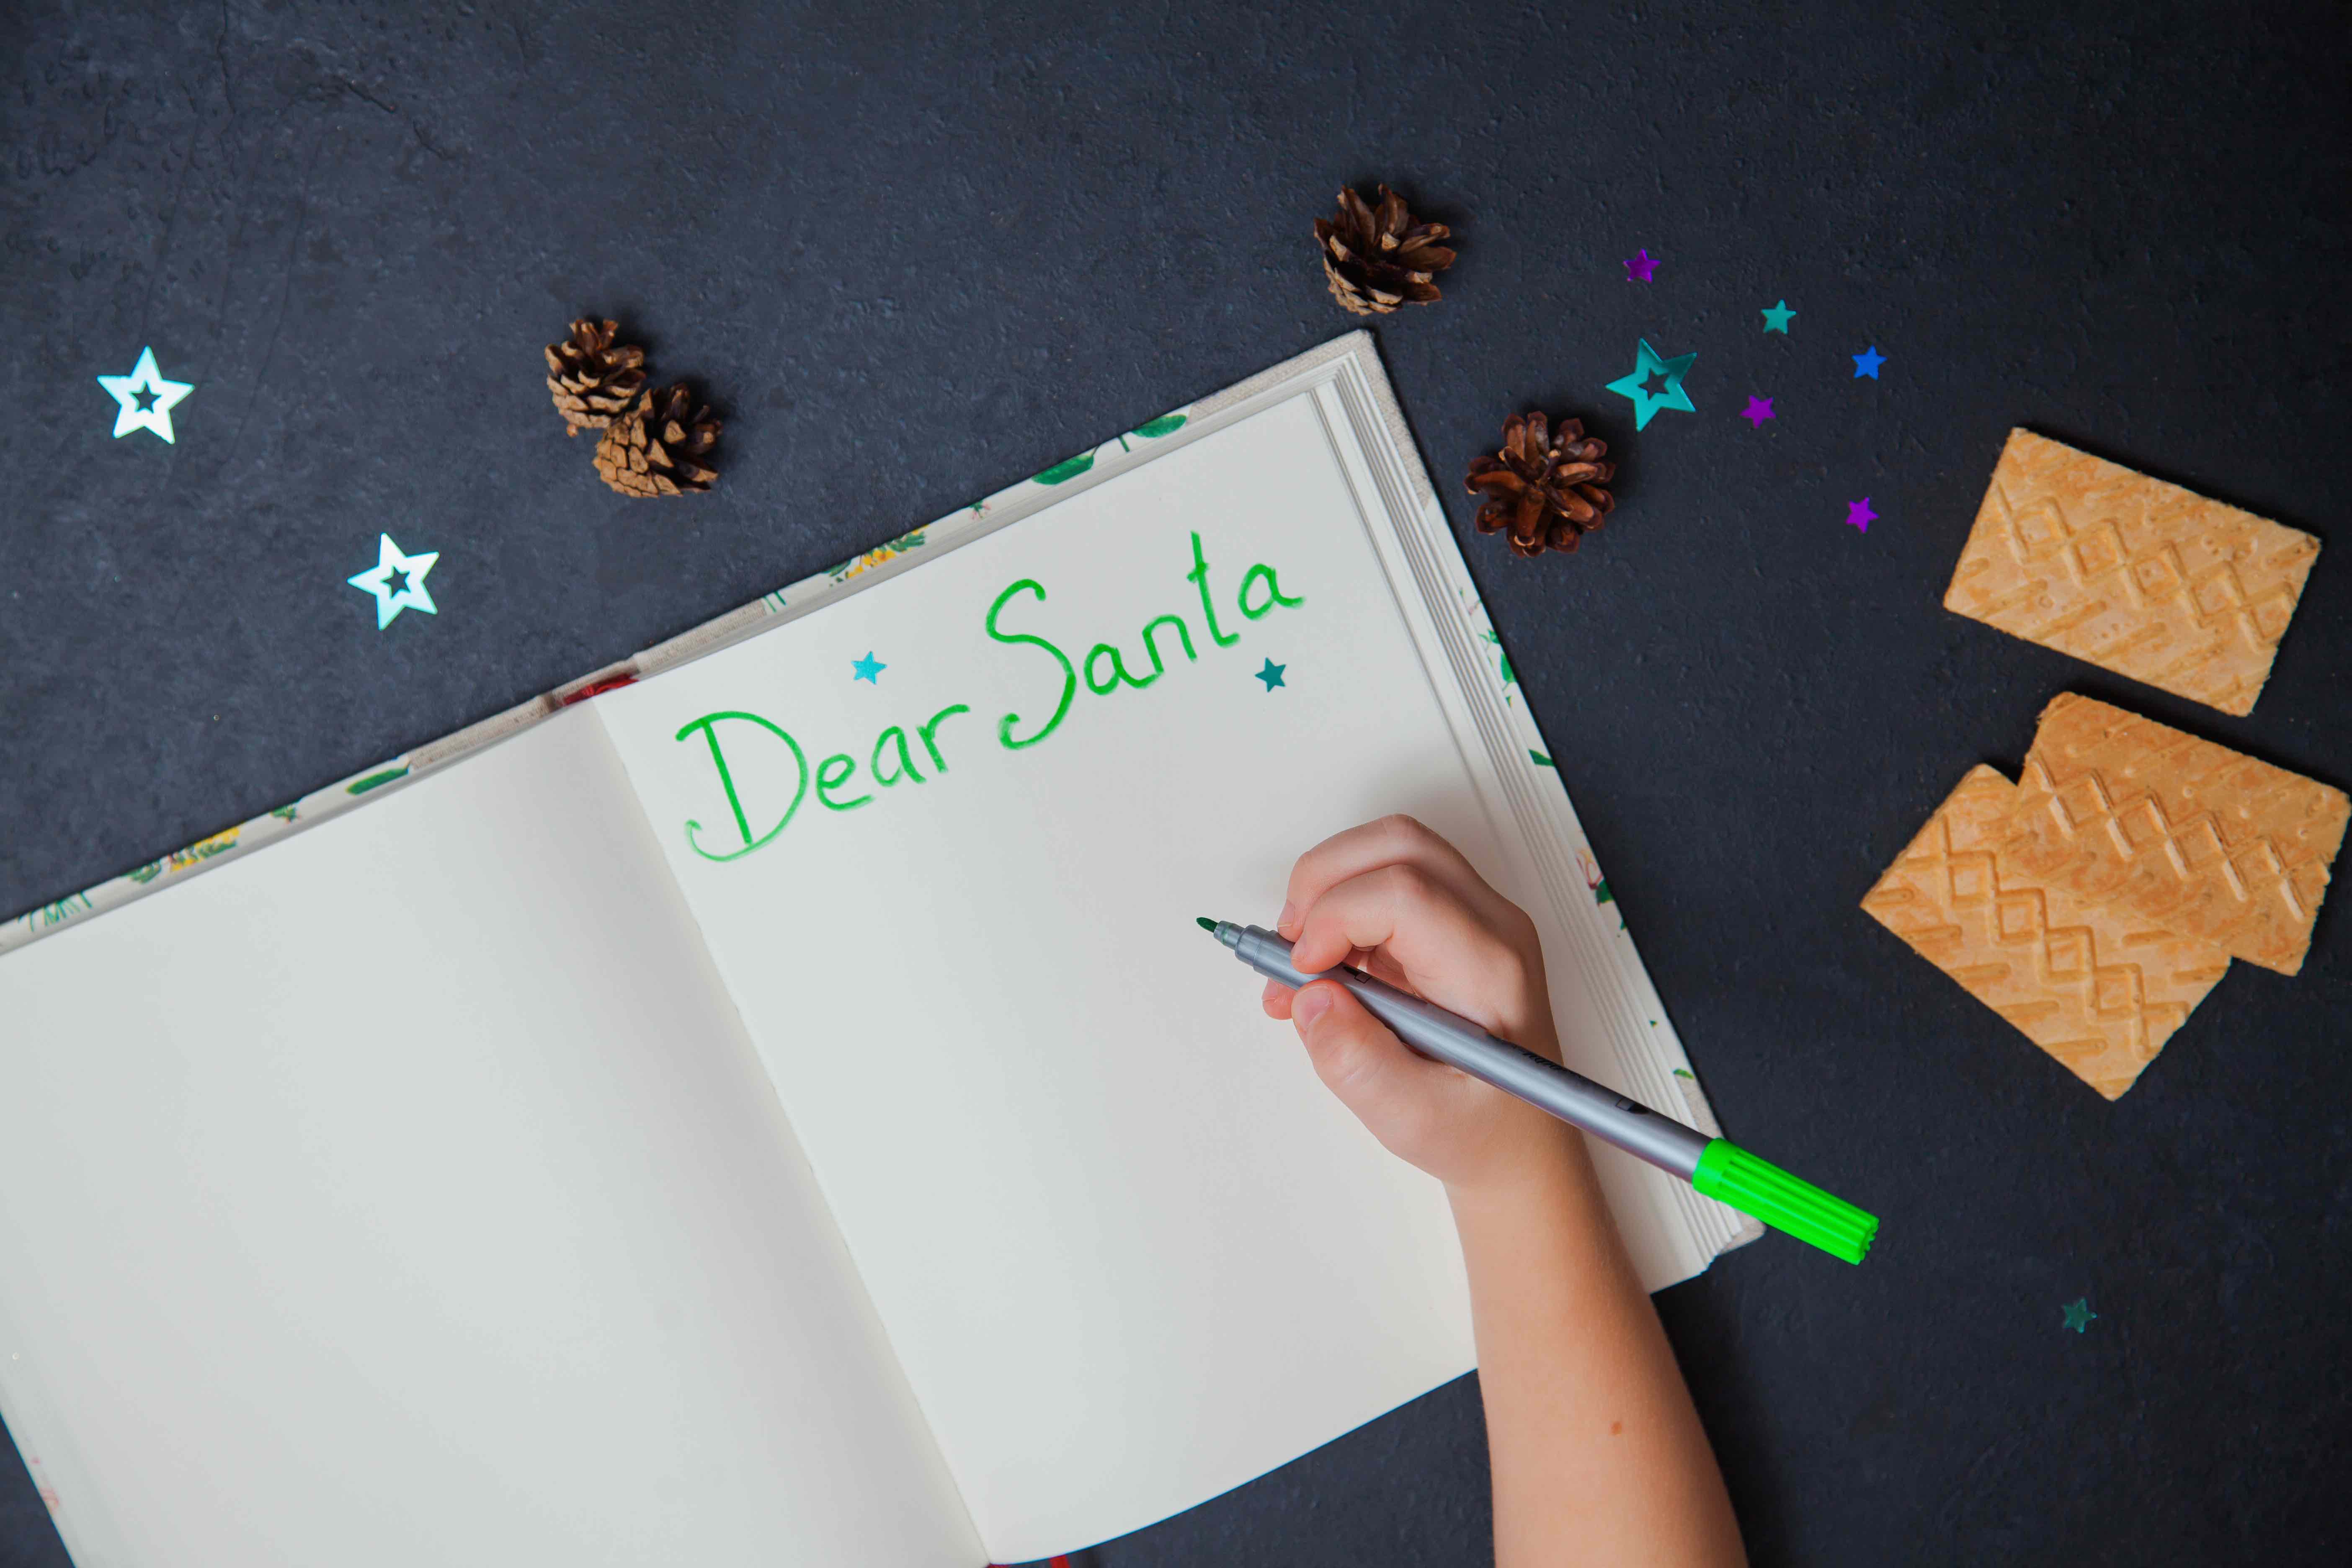 Send Handwritten Letters to Your Nearest and Dearest this Christmas